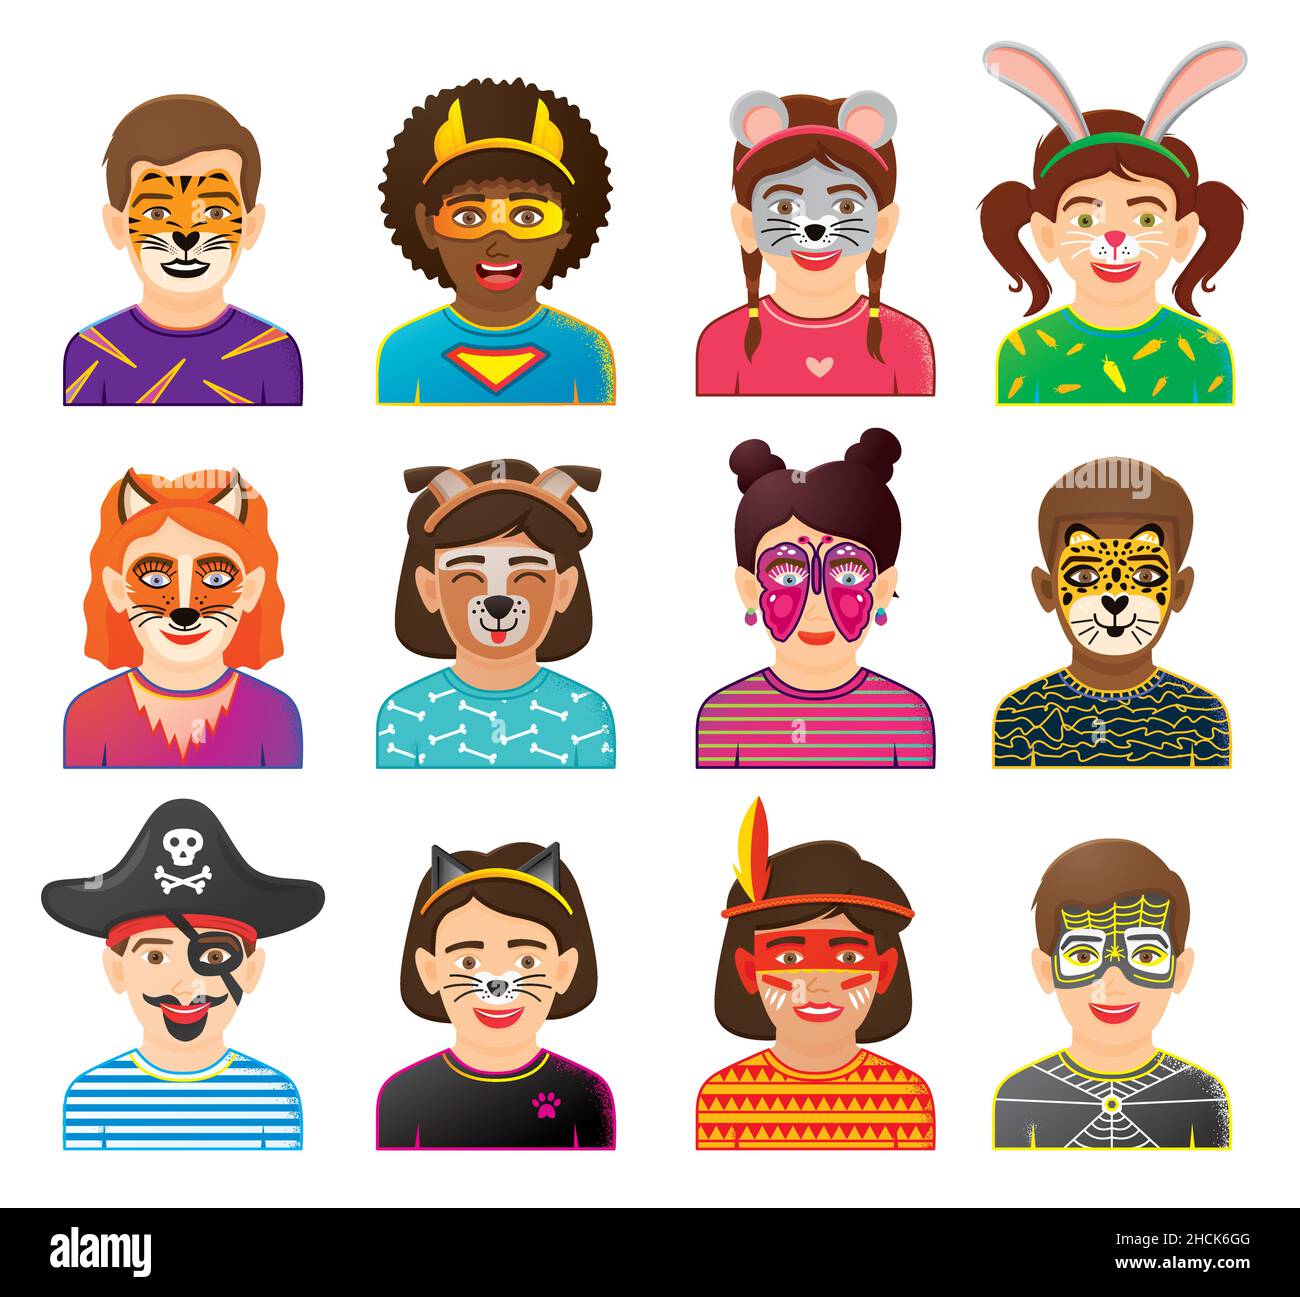 Face Painting. Collection of Kids Faces with Painting with Animals and Superheroes. Vector Illustration. Funny Kids Faces. Carnaval Costume with Mask. Stock Vector